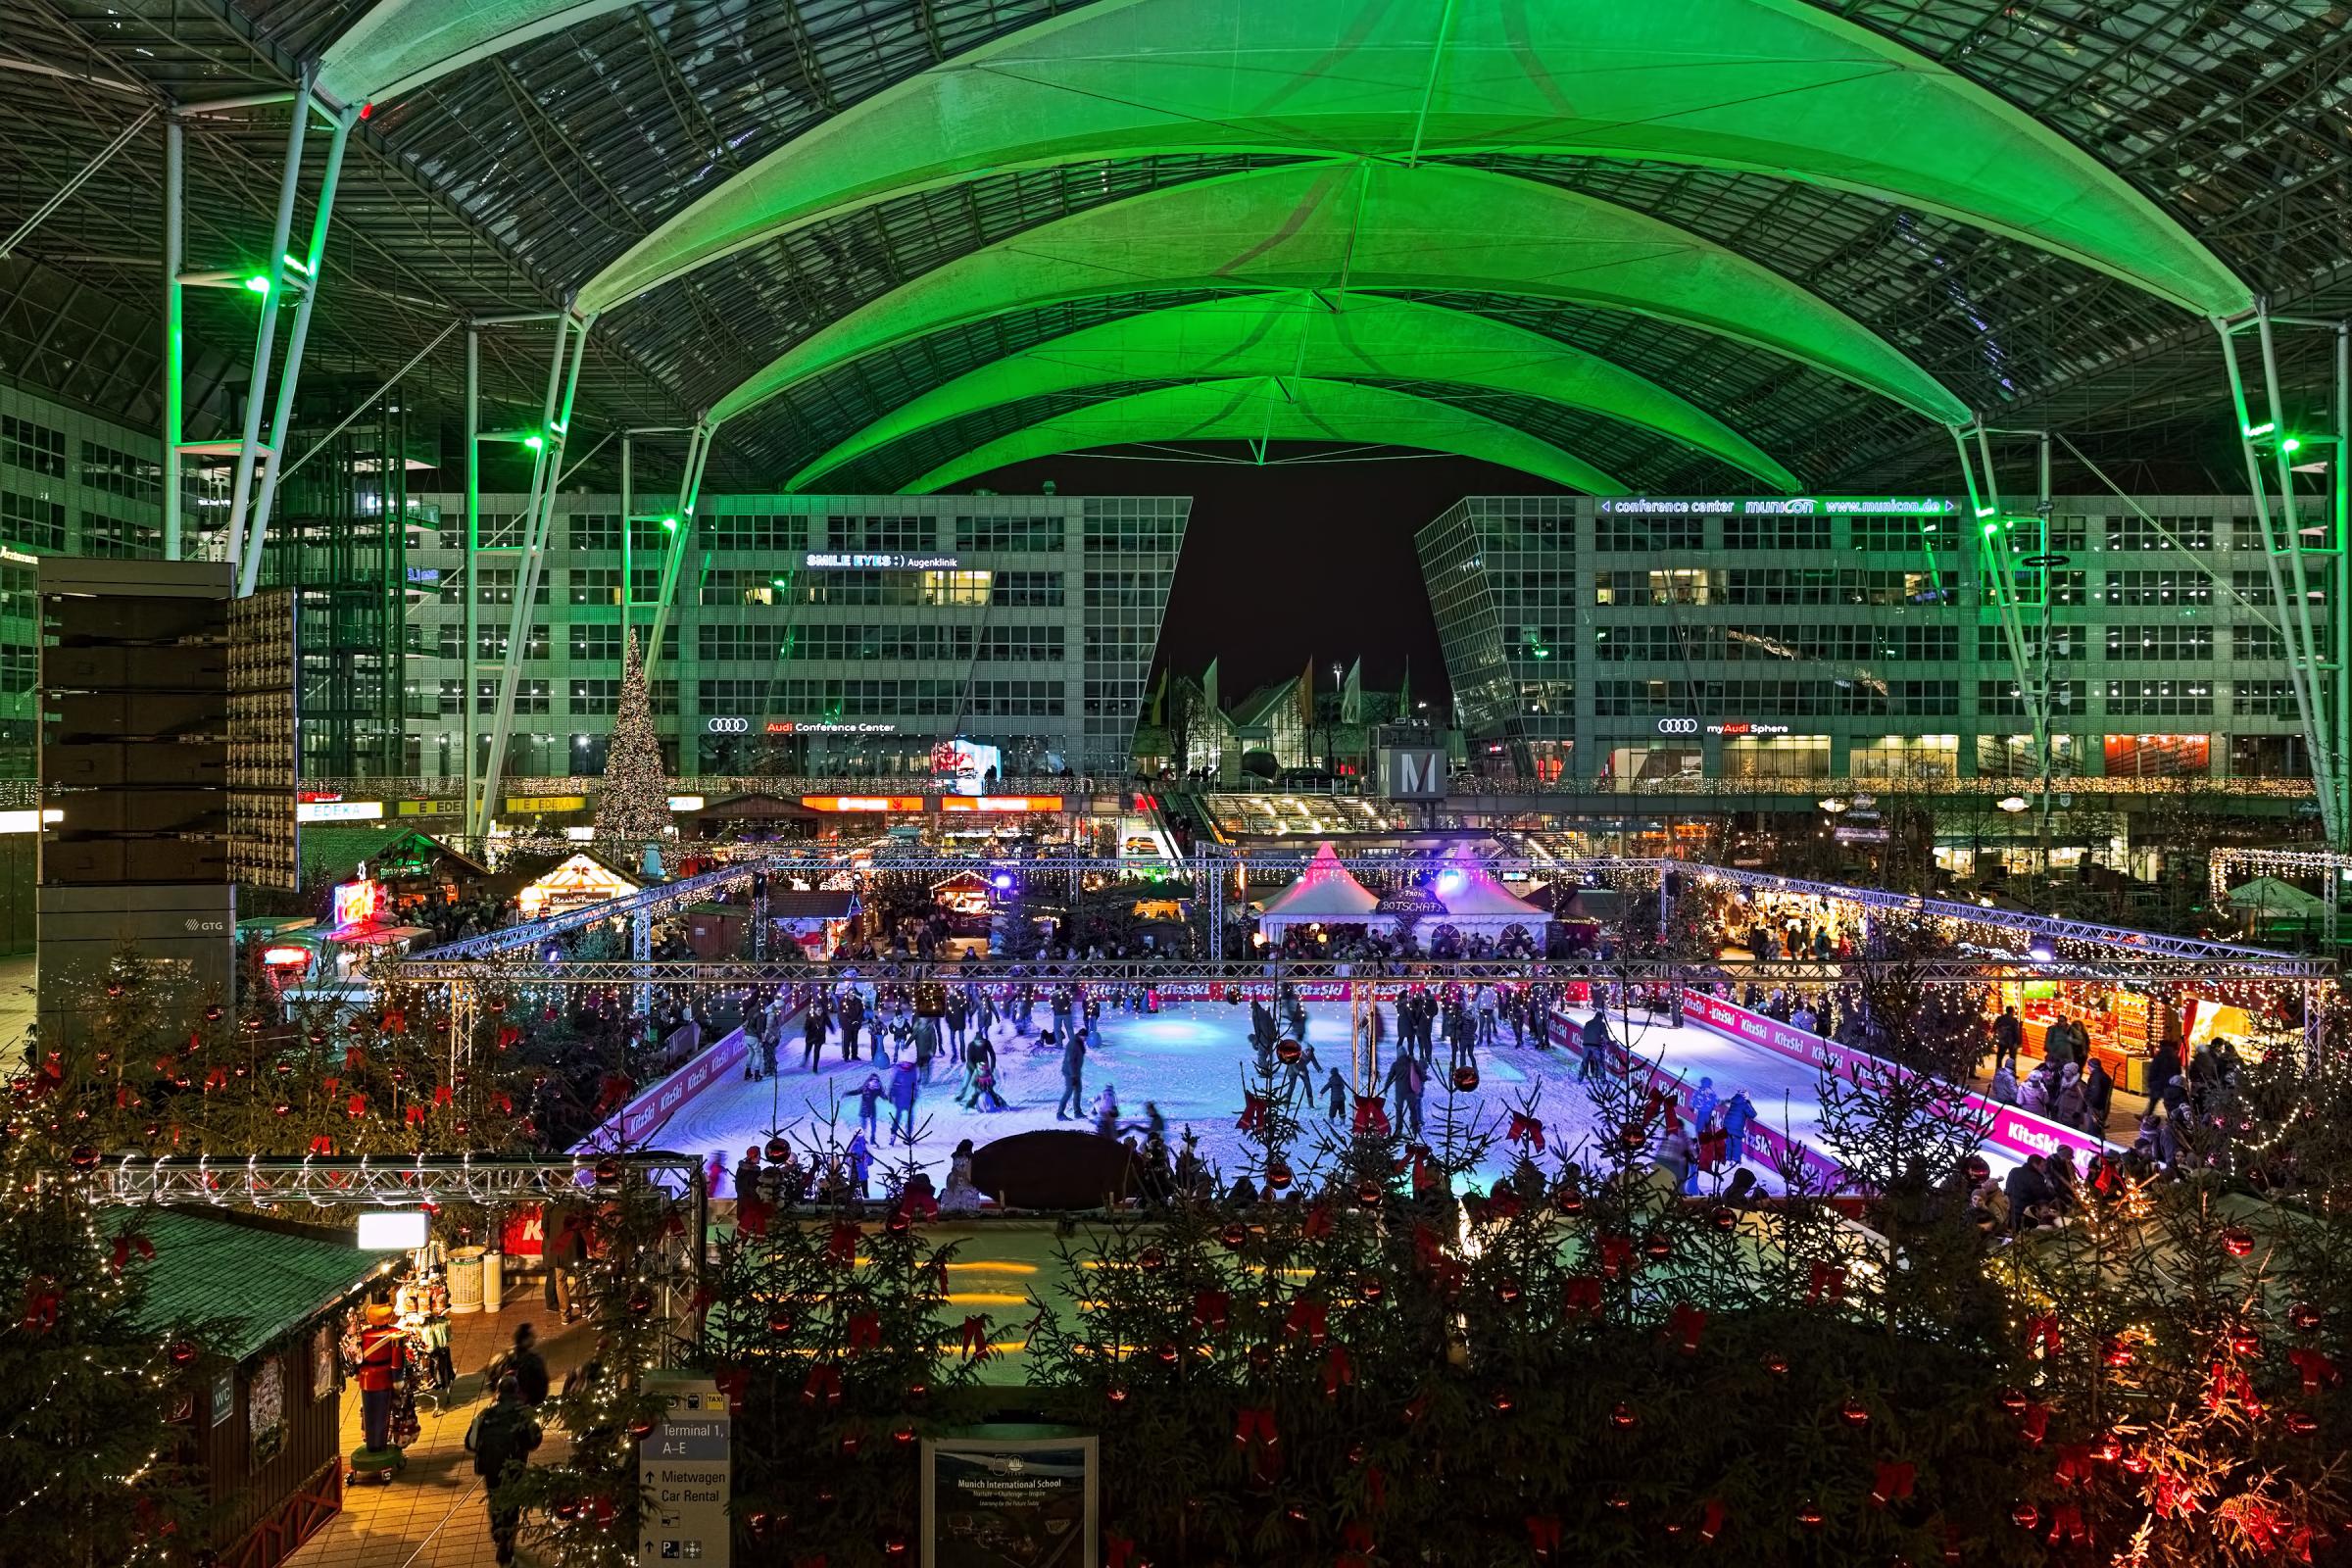 Christmas Market in the Munich Airport, Germany